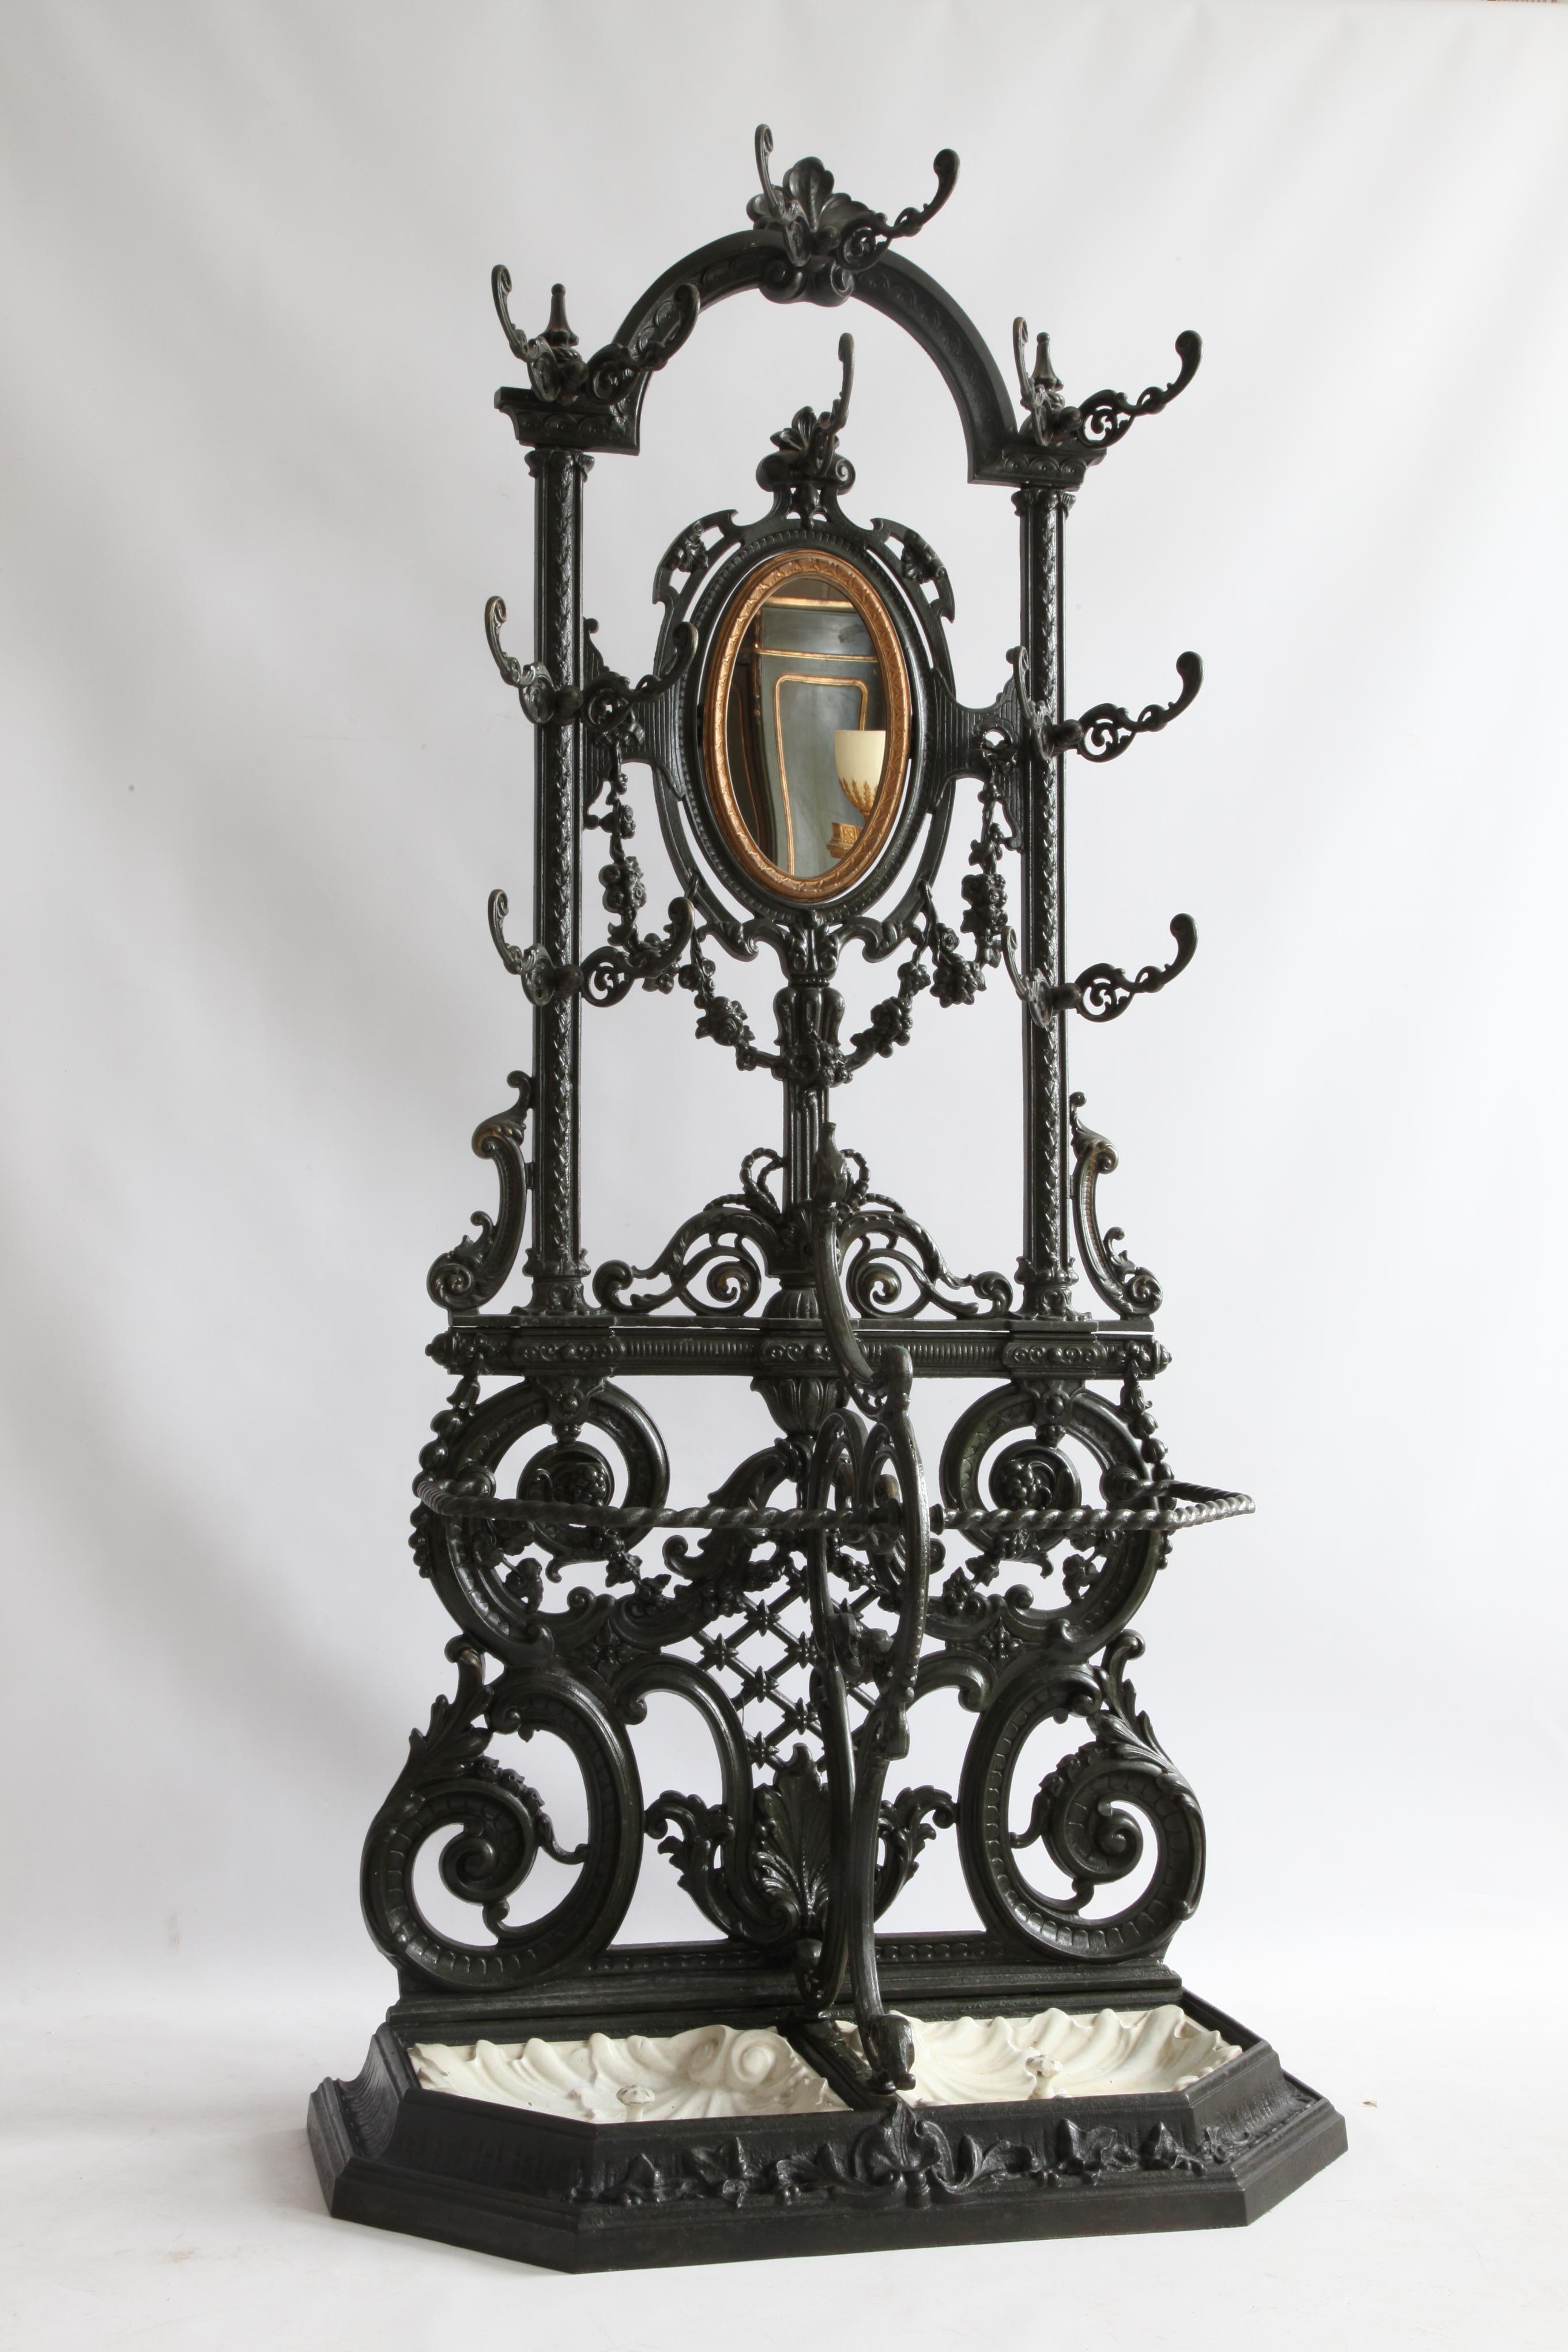 An impressive 19th century, Napoleon III, cast iron coat, hat and umbrella stand from the Frères Corneau, brothers Alfred and Èmile, who were master ironsmiths who started one of the leading Iron foundries in Europe from Ardenne, France in 1846. The